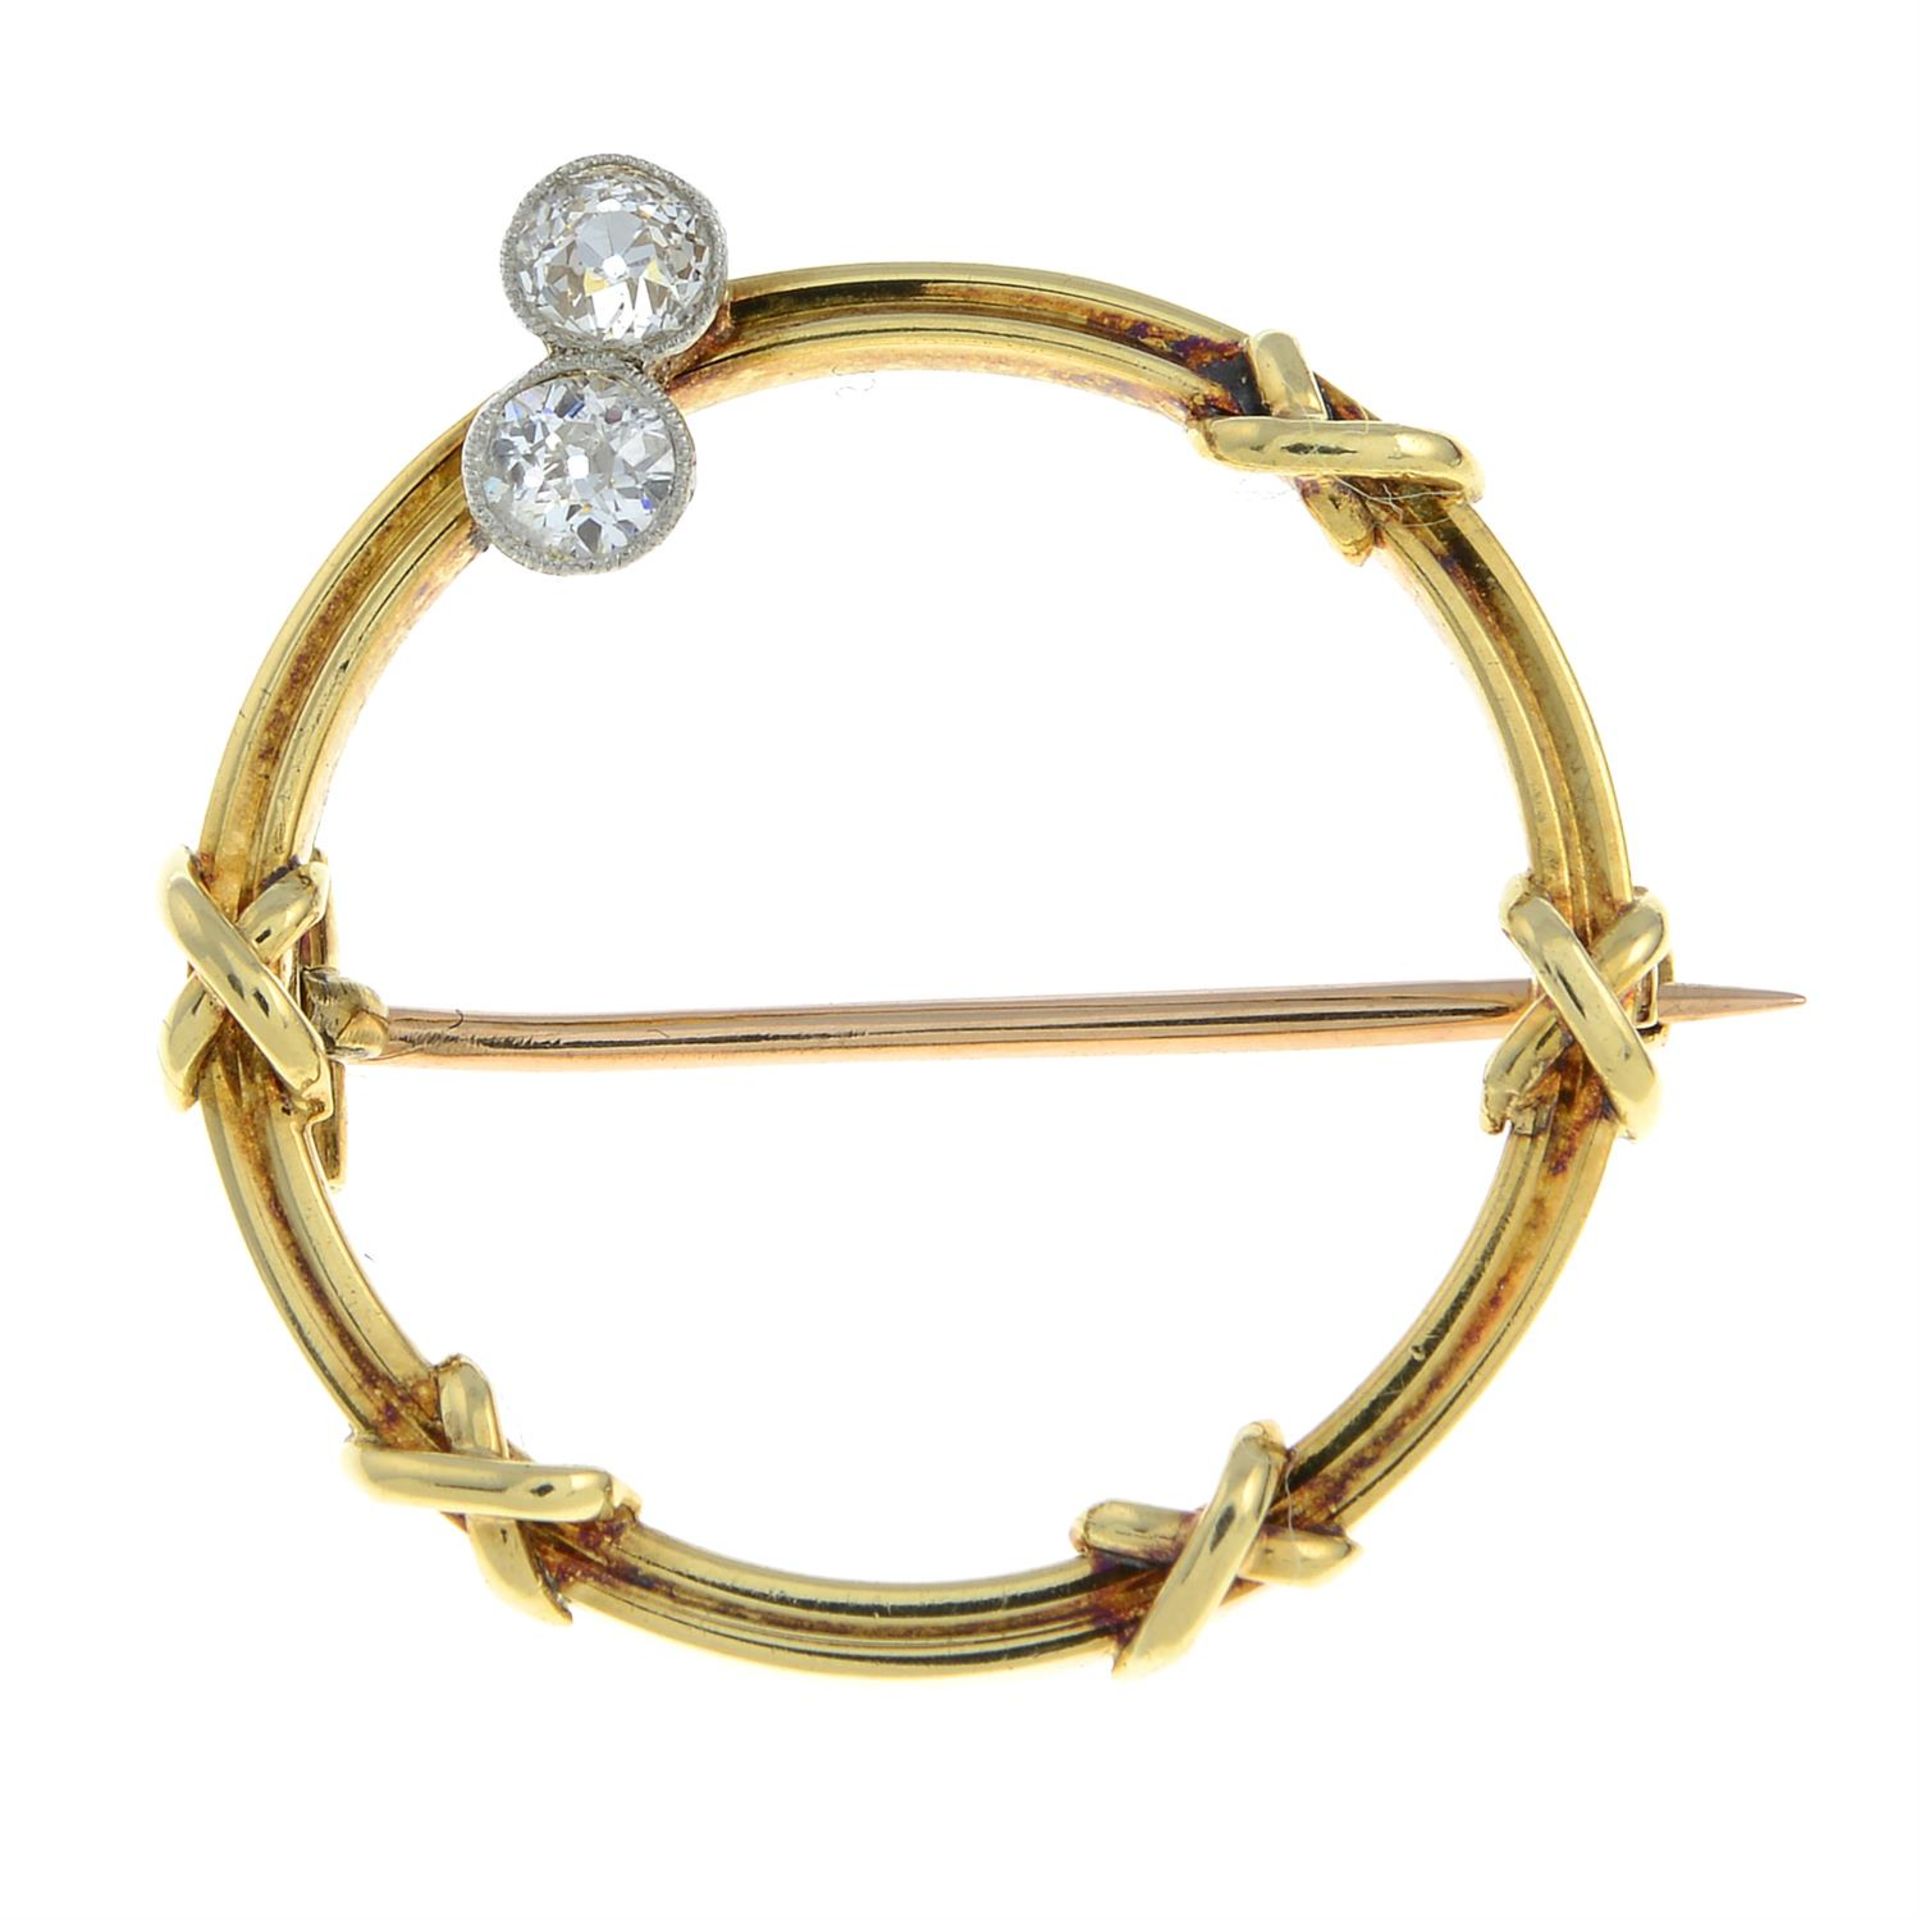 An early 20th century 15ct gold circular brooch, with cross motif and old-cut diamond two-stone